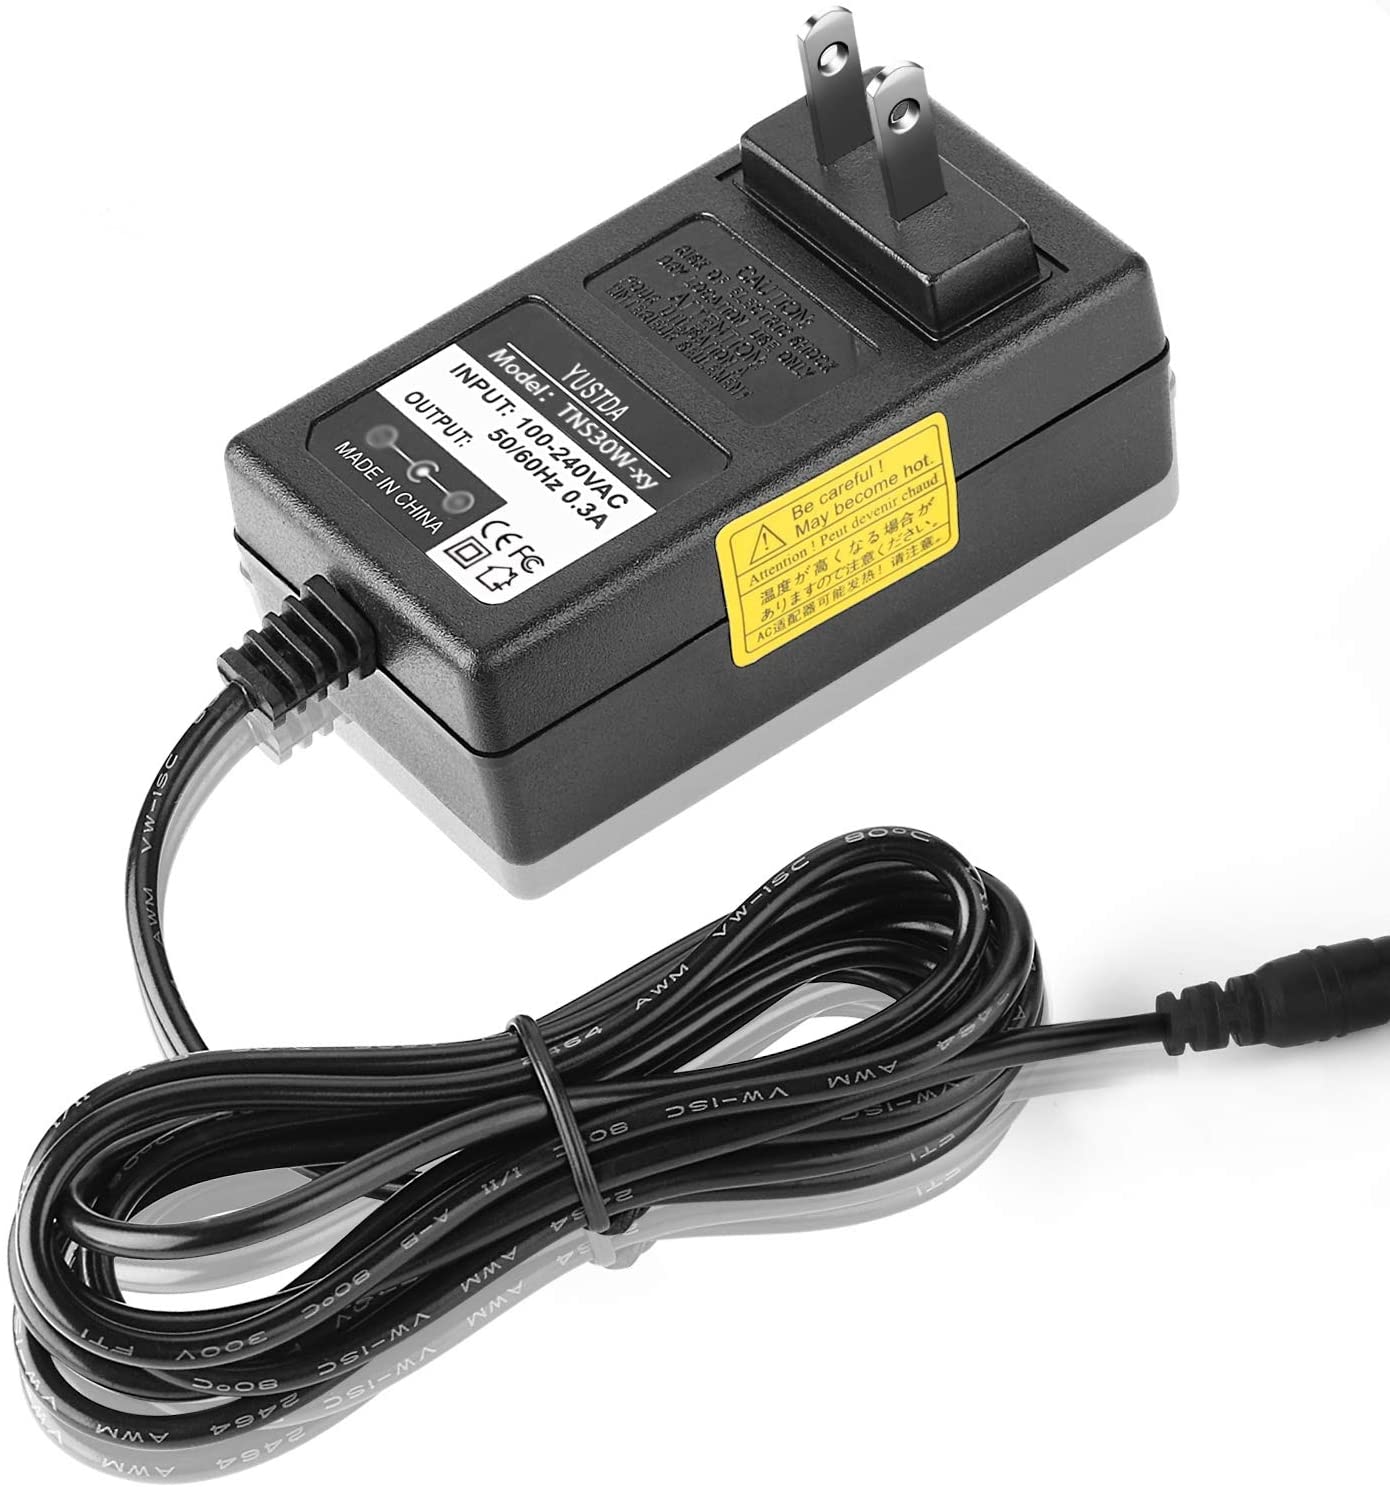 12v Ac Dc Adapter for AverMedia AverVision CP 130 135 155 300 355 530 330 CP135 VISNCP135 M70 P0B7A POB7A cp150 150 300i 300p 300AF+ POE3 Document Camera Power Supply Cord Charger - image 3 of 4